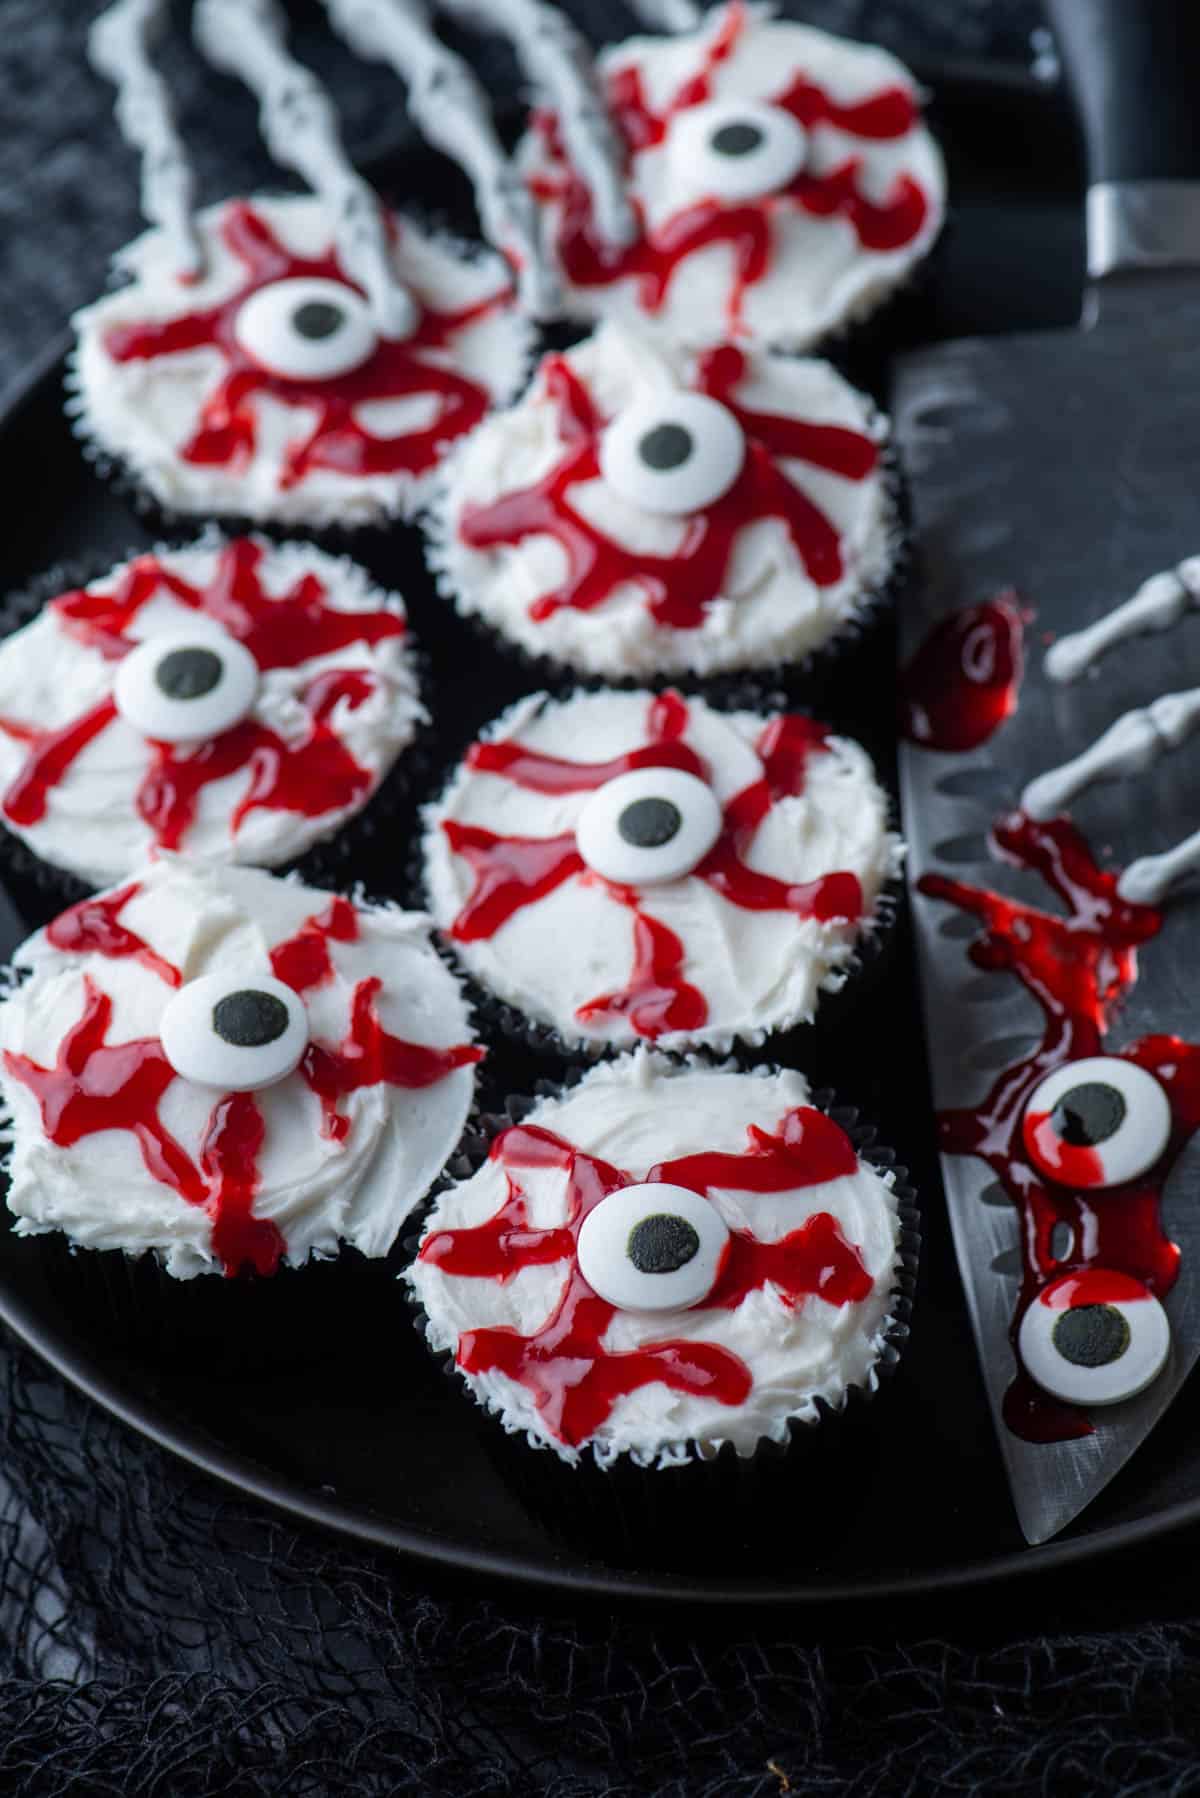 eyeball cupcakes on a black plate with a large knife and skeleton hands